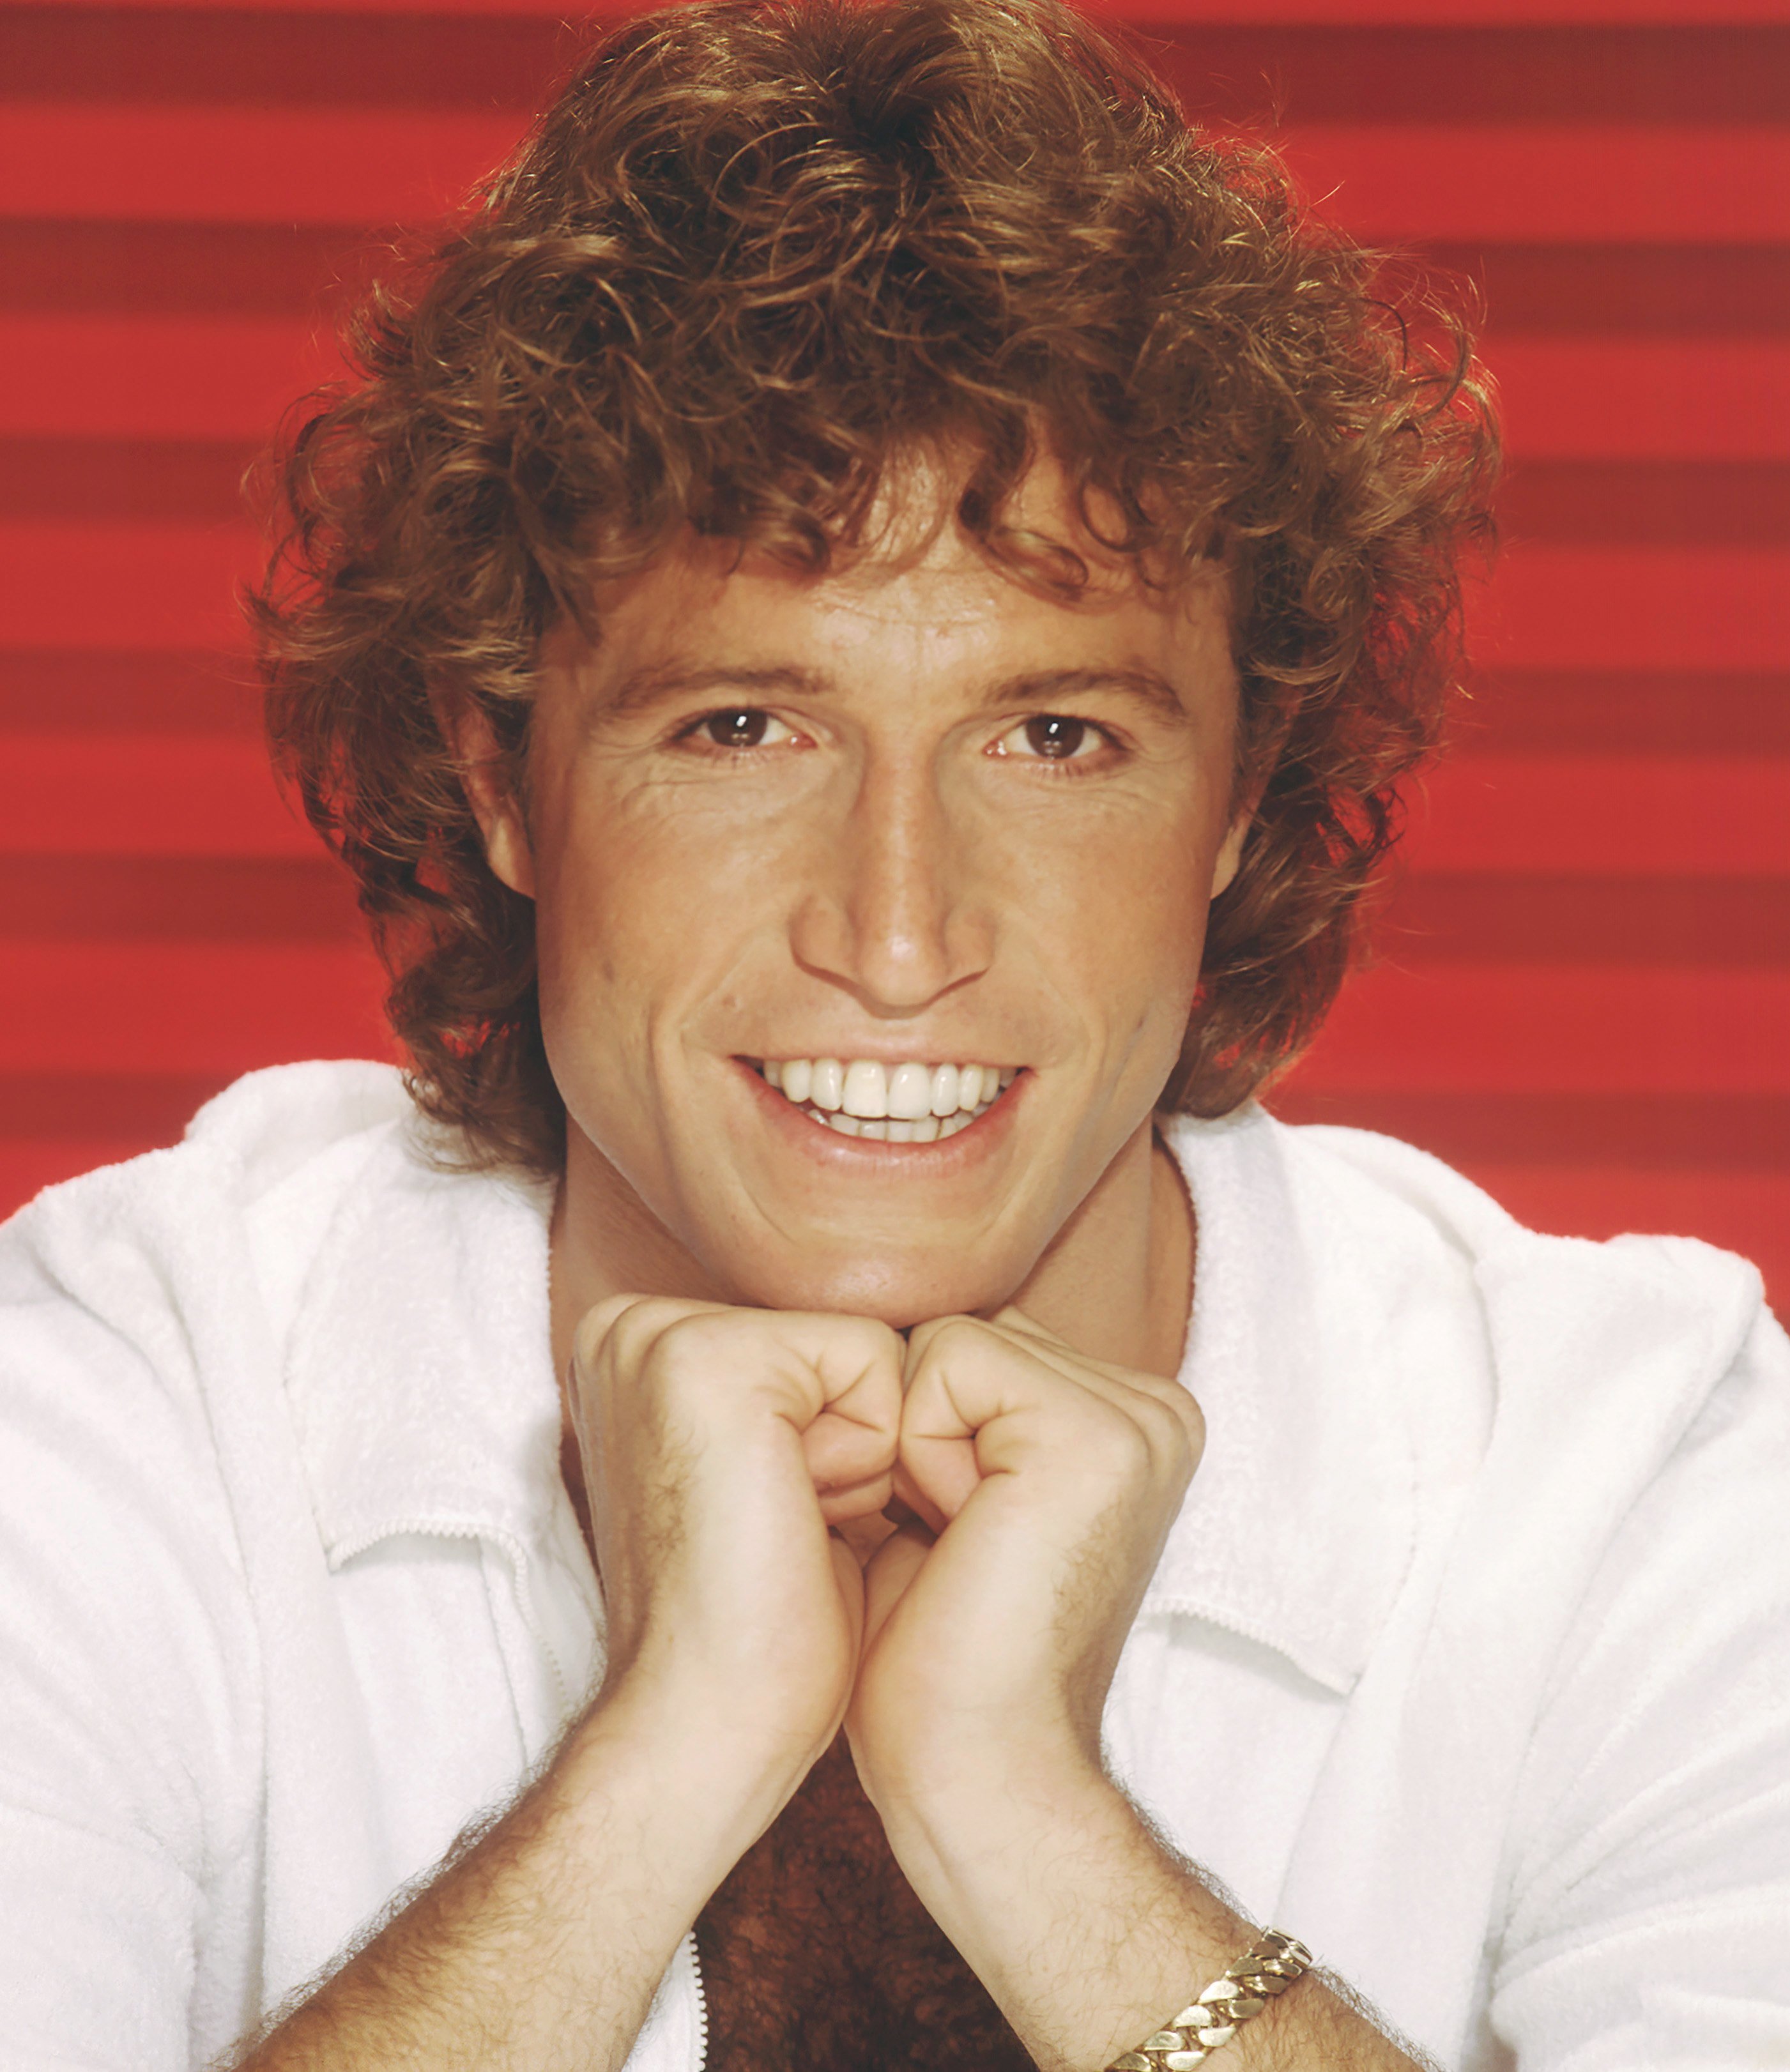 Singer Andy Gibb poses for a portrait in 1981 in Los Angeles, California. | Source: Getty Images